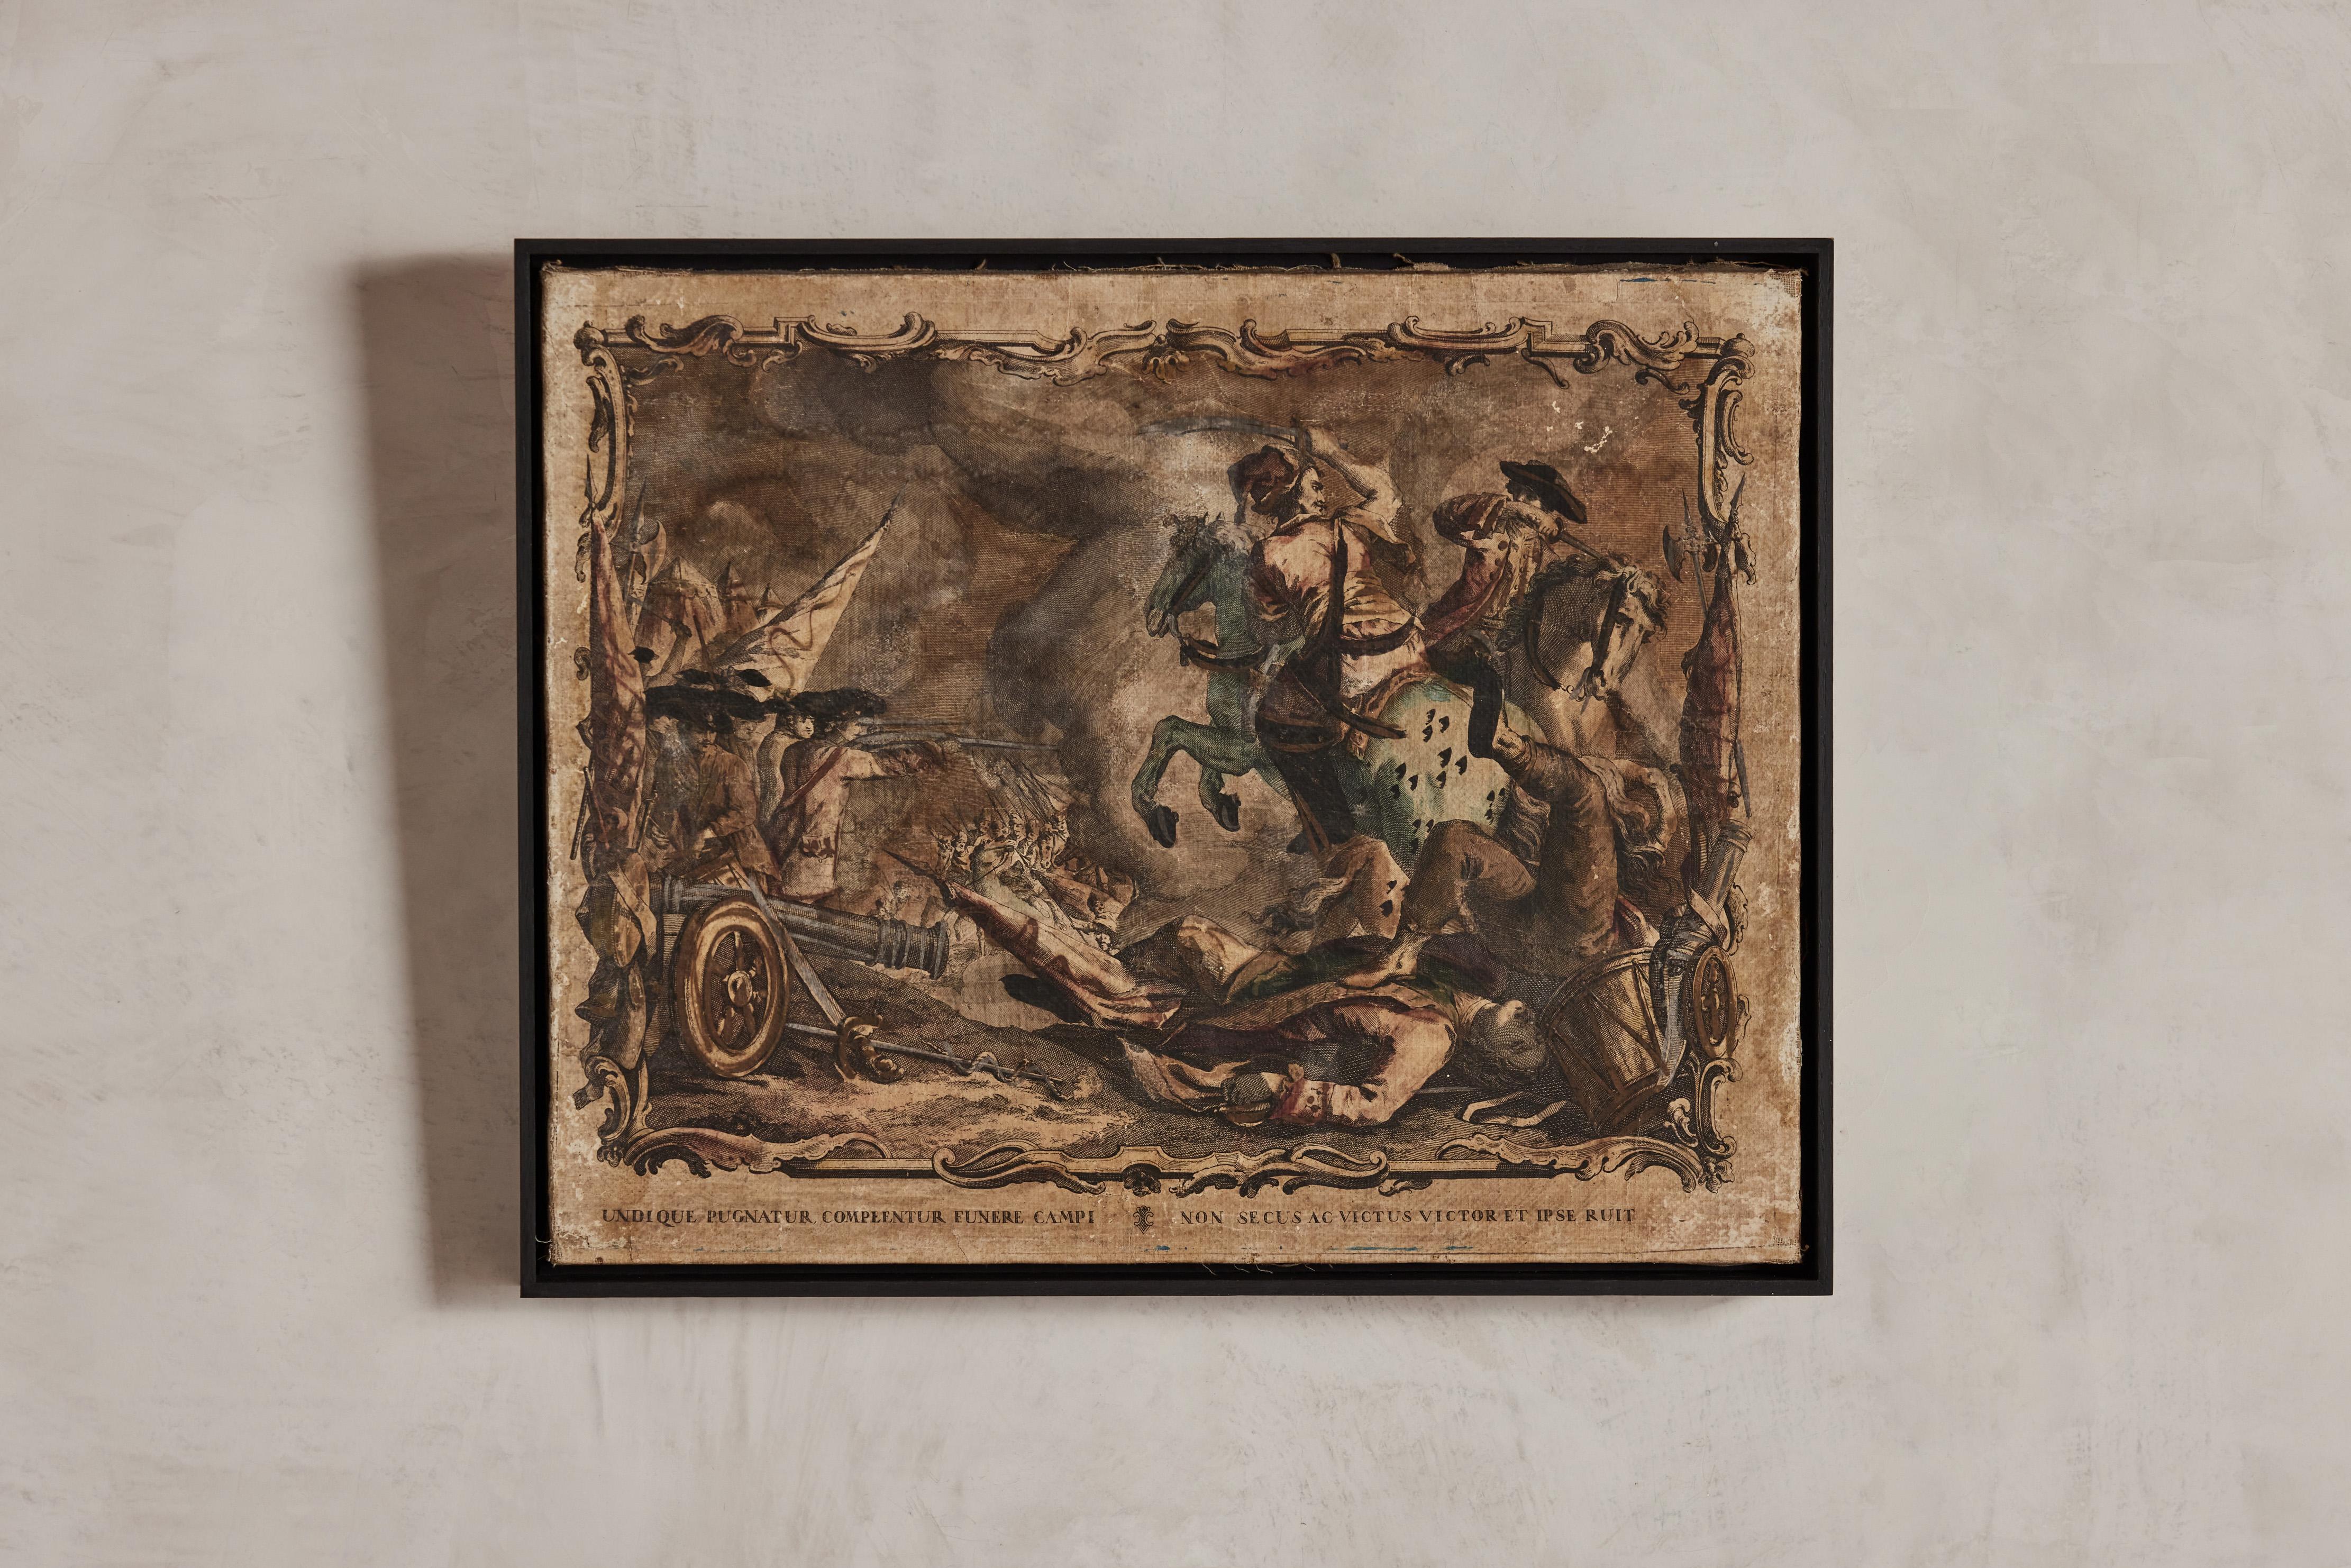 Set of four 19th century hand painted etchings on canvas that depict four different battle scenes. Visible wear on canvas and etchings. Newly framed in a floating black wood frame.